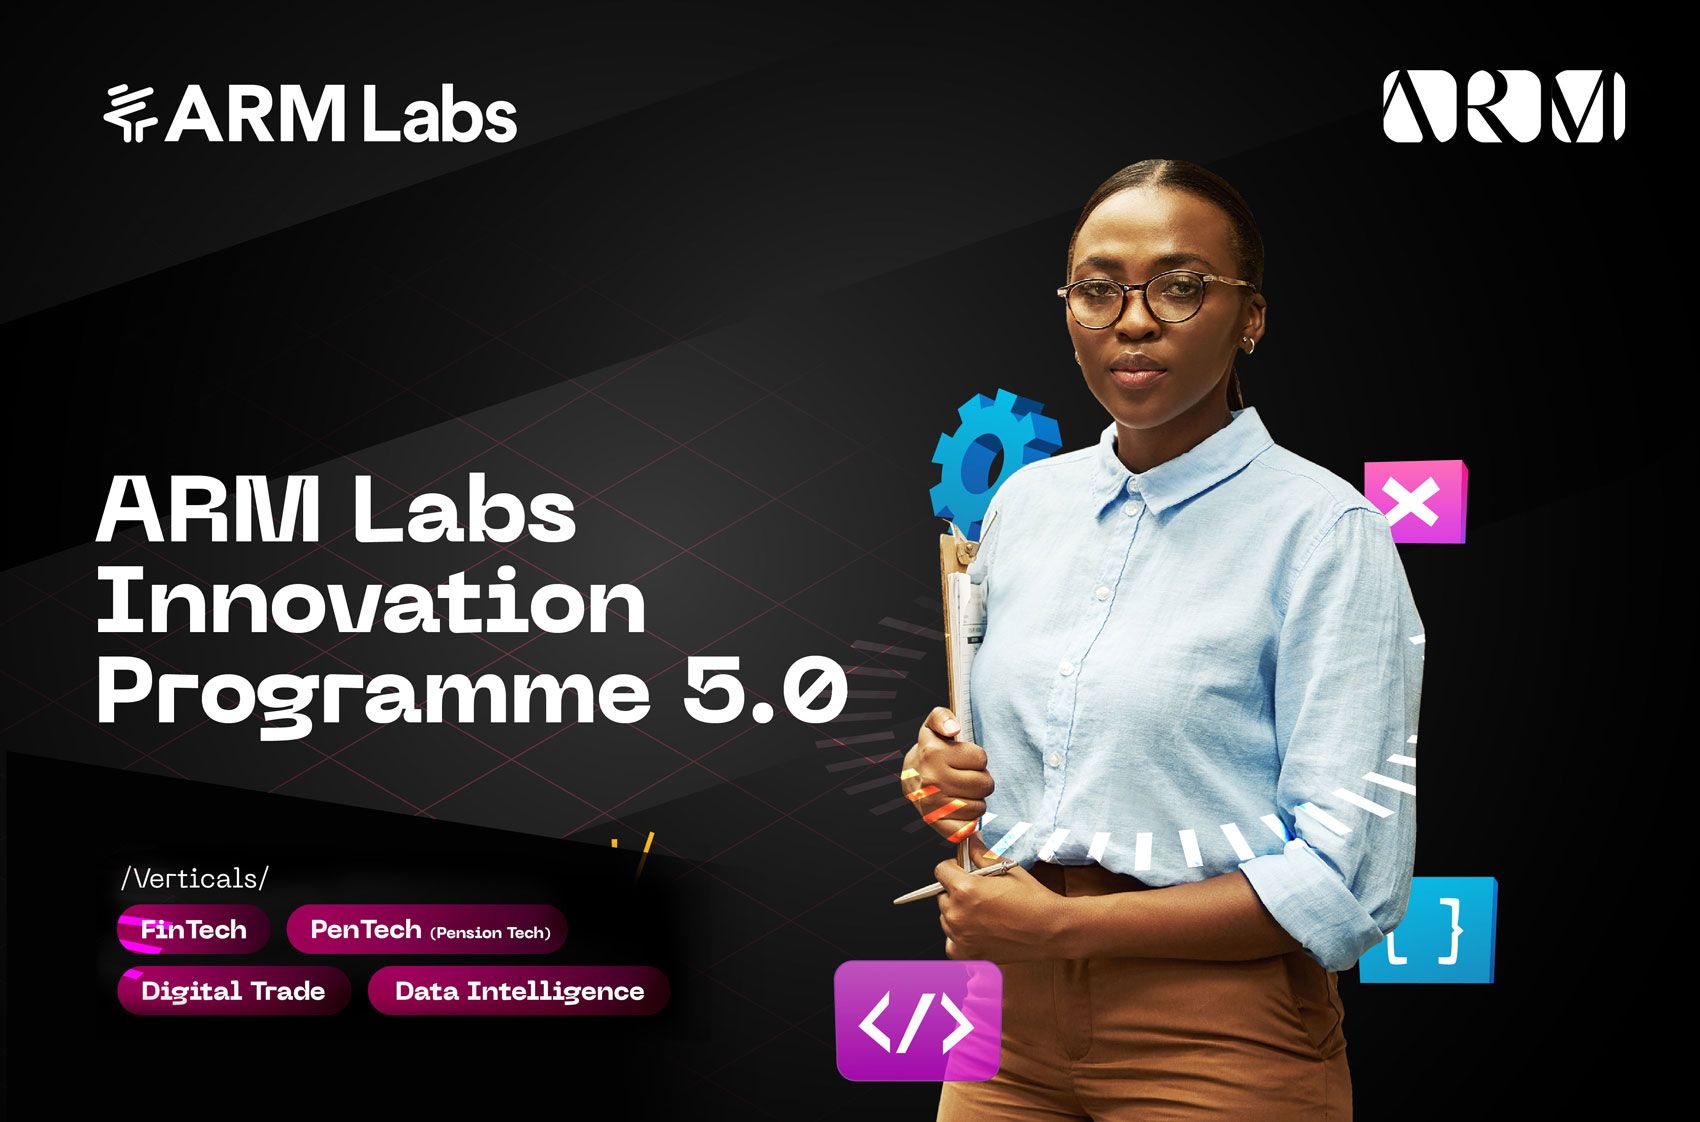 ARM Labs Invite Applications for its Innovation Programme 5.0